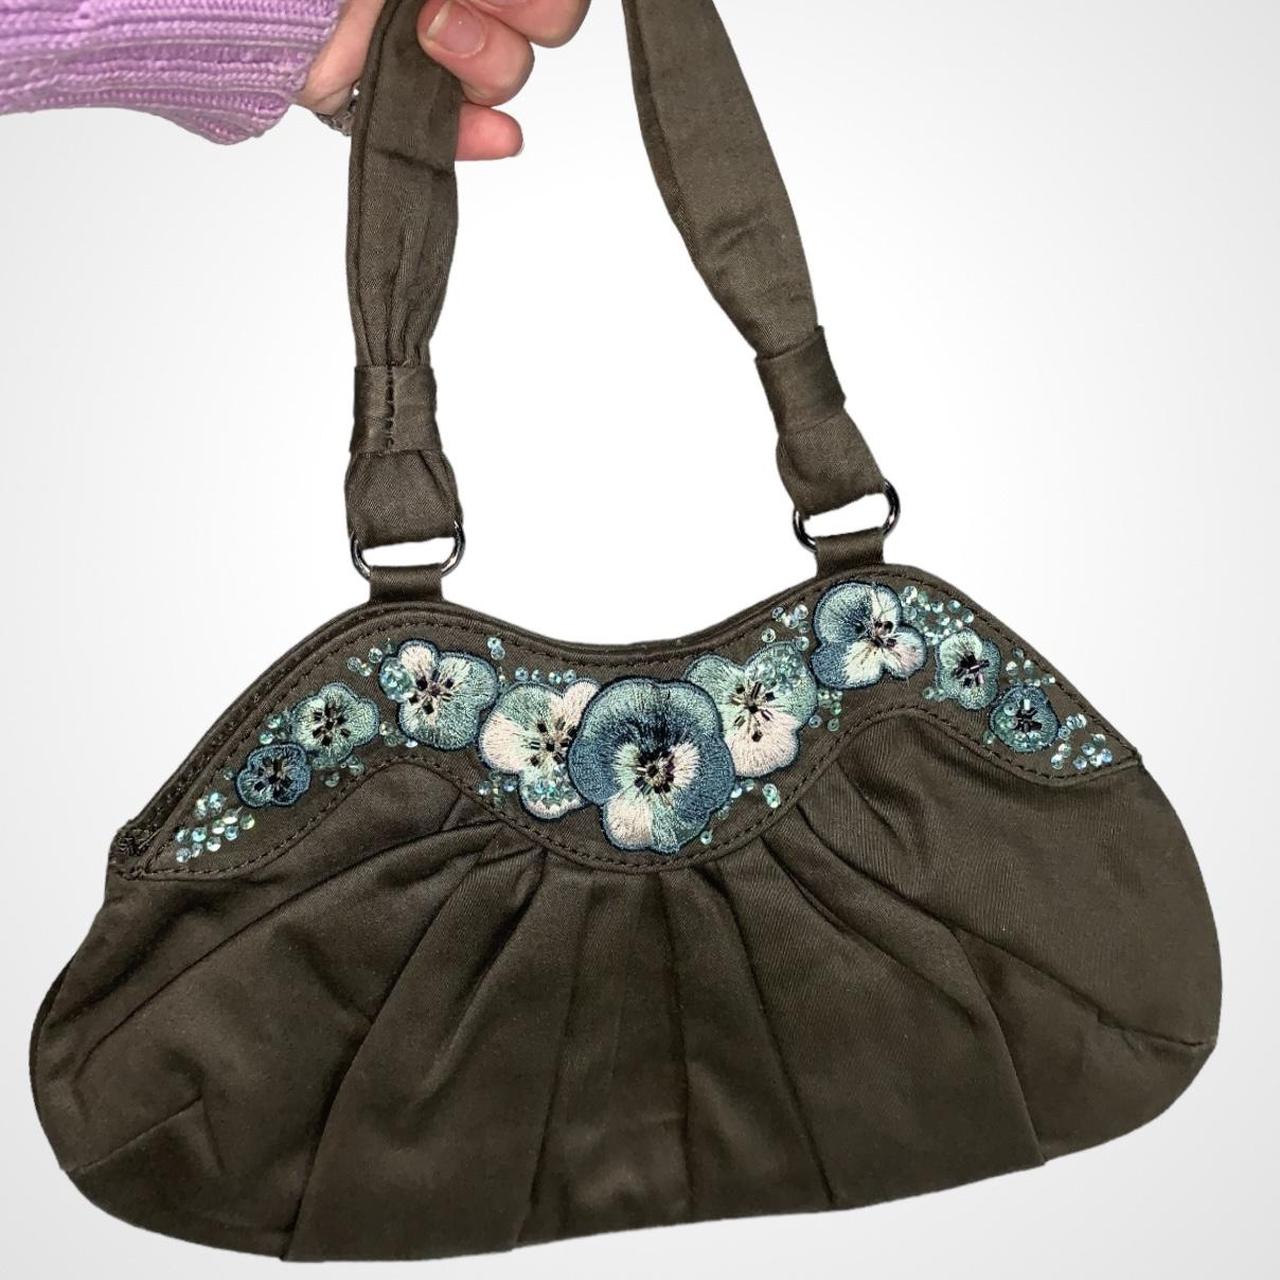 Vintage y2k fairycore shoulder bag with flower embroidery